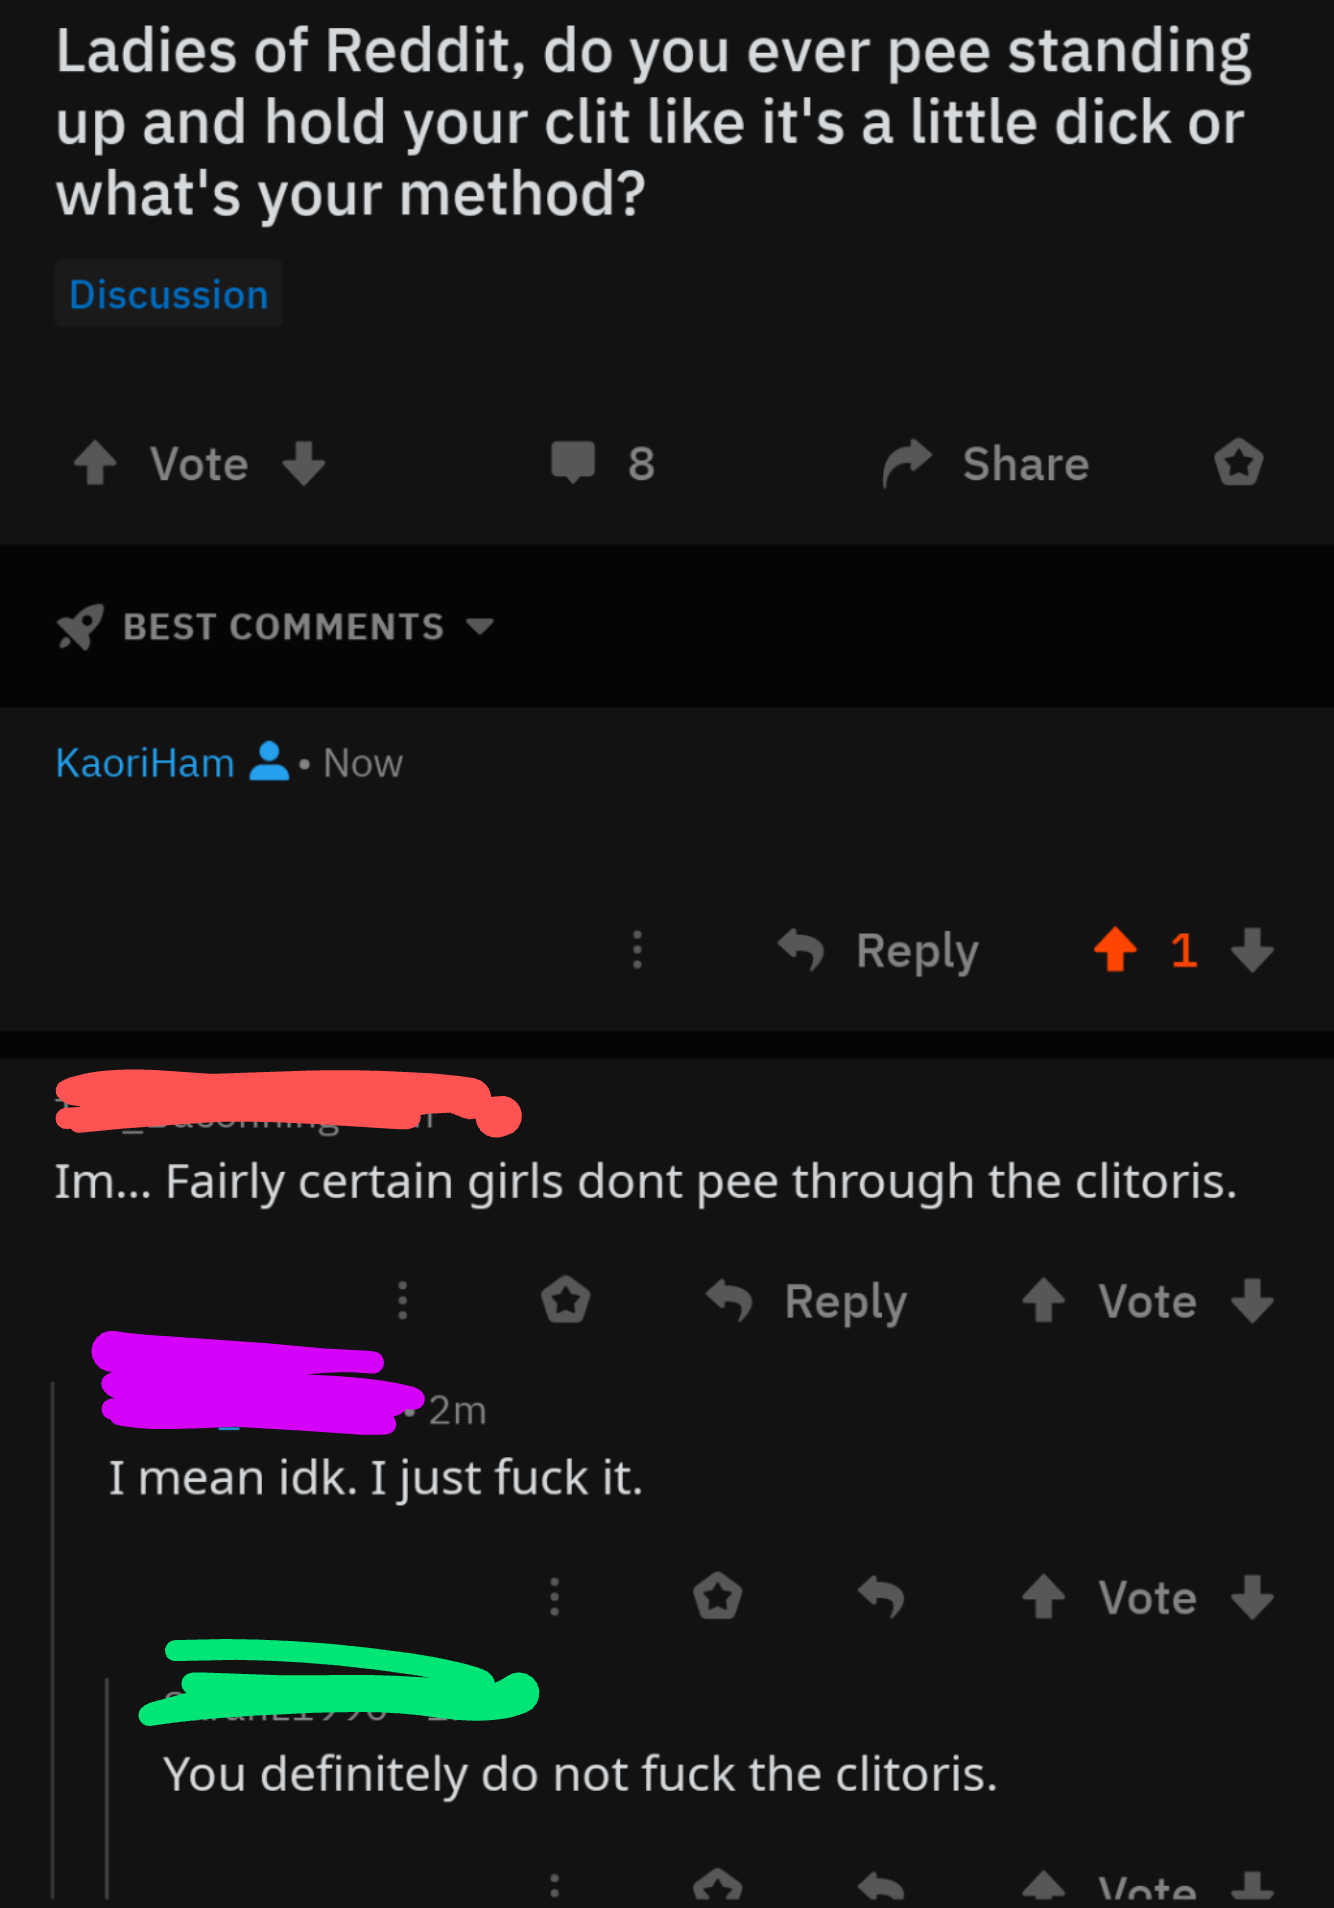 screenshot - Ladies of Reddit, do you ever pee standing up and hold your clit it's a little dick or what's your method? Discussion 1 Vote 8 8 o Y Best KaoriHam 8. Now 11 Im... Fairly certain girls dont pee through the clitoris. 4 Vote 2m I mean idk. I jus